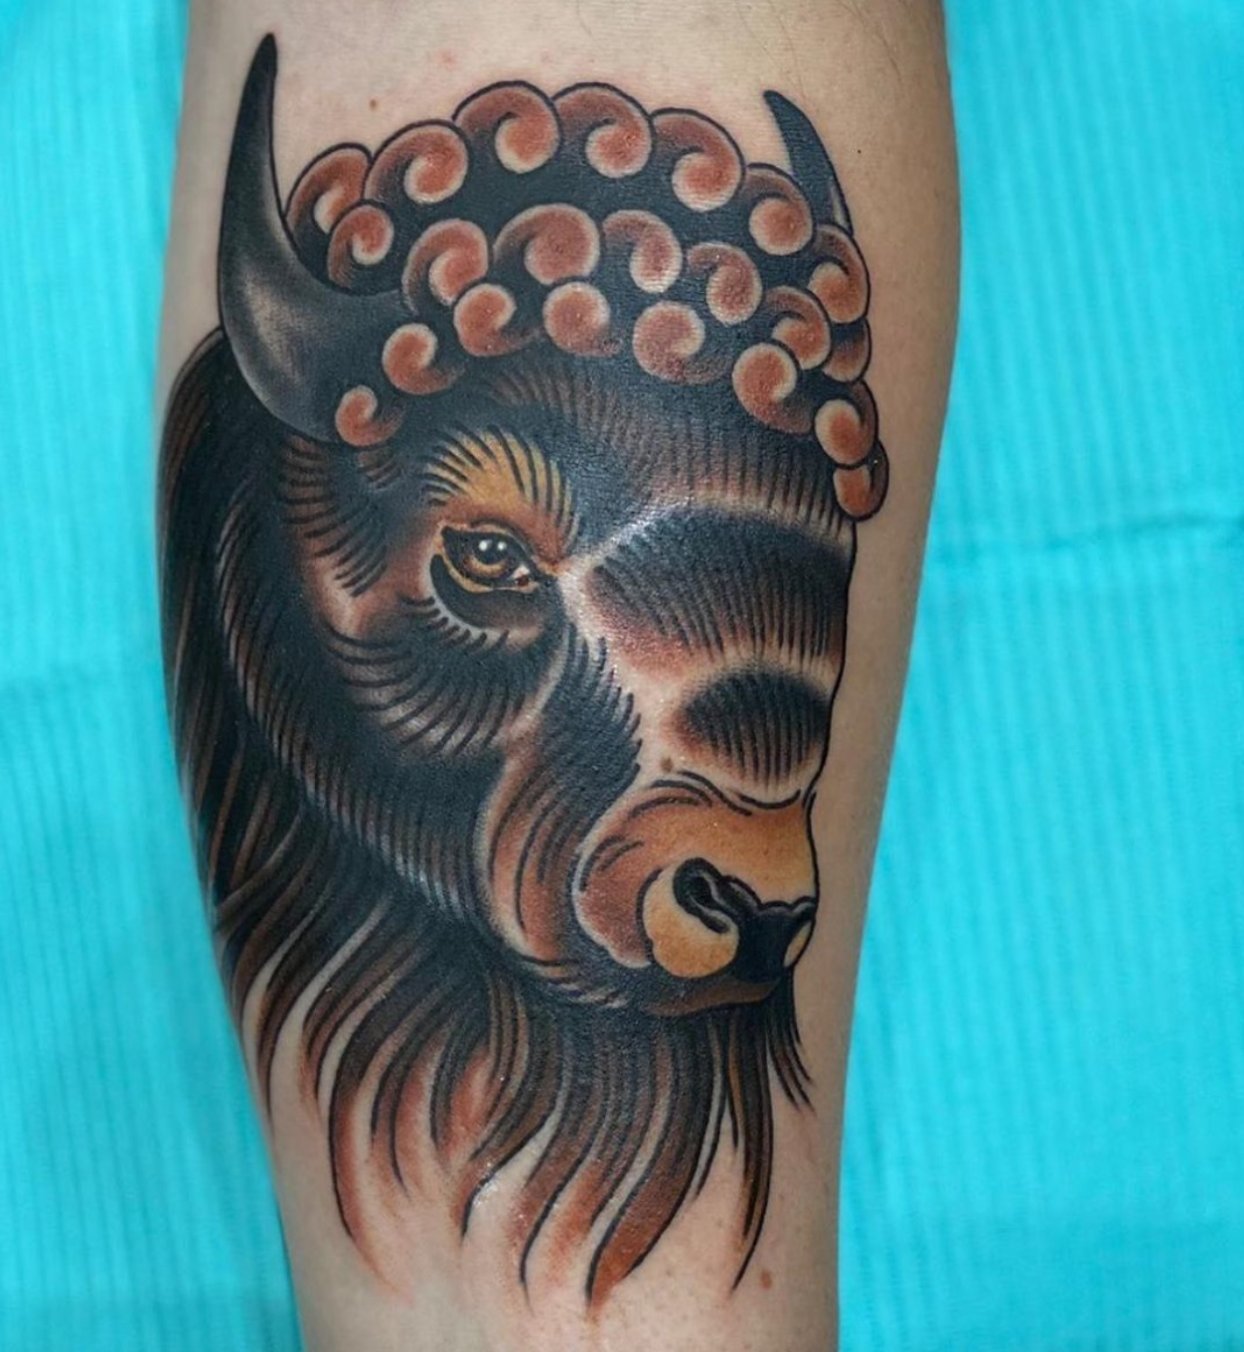 Revolt Tattoos on Twitter Jason used the bold style of American  traditional to create this buffalo tattoo Artist Jason Location Fashion  Show Book your appointment at httpstco7GU80jDCSP  httpstcoaMhvQ6kZHt  Twitter